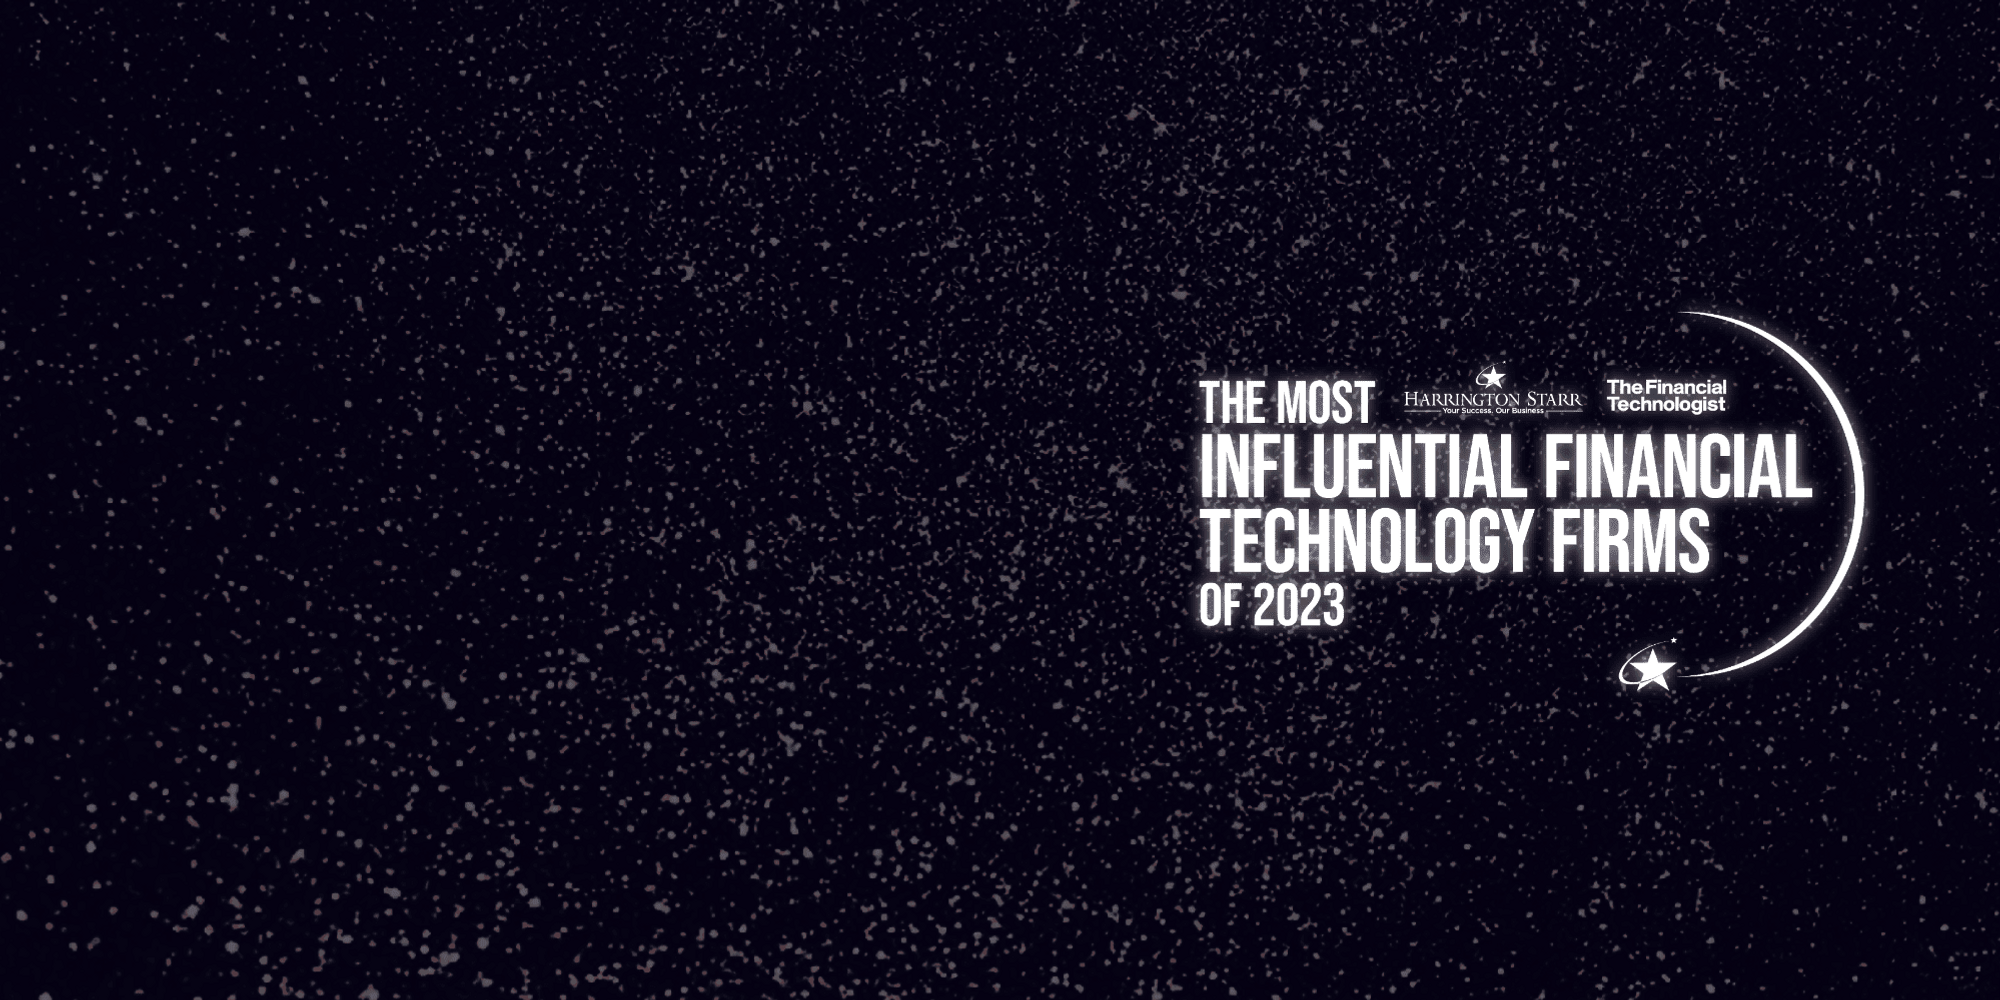 The Financial Technologist Magazine | The Most Influential Financial Technology Firms of 2023